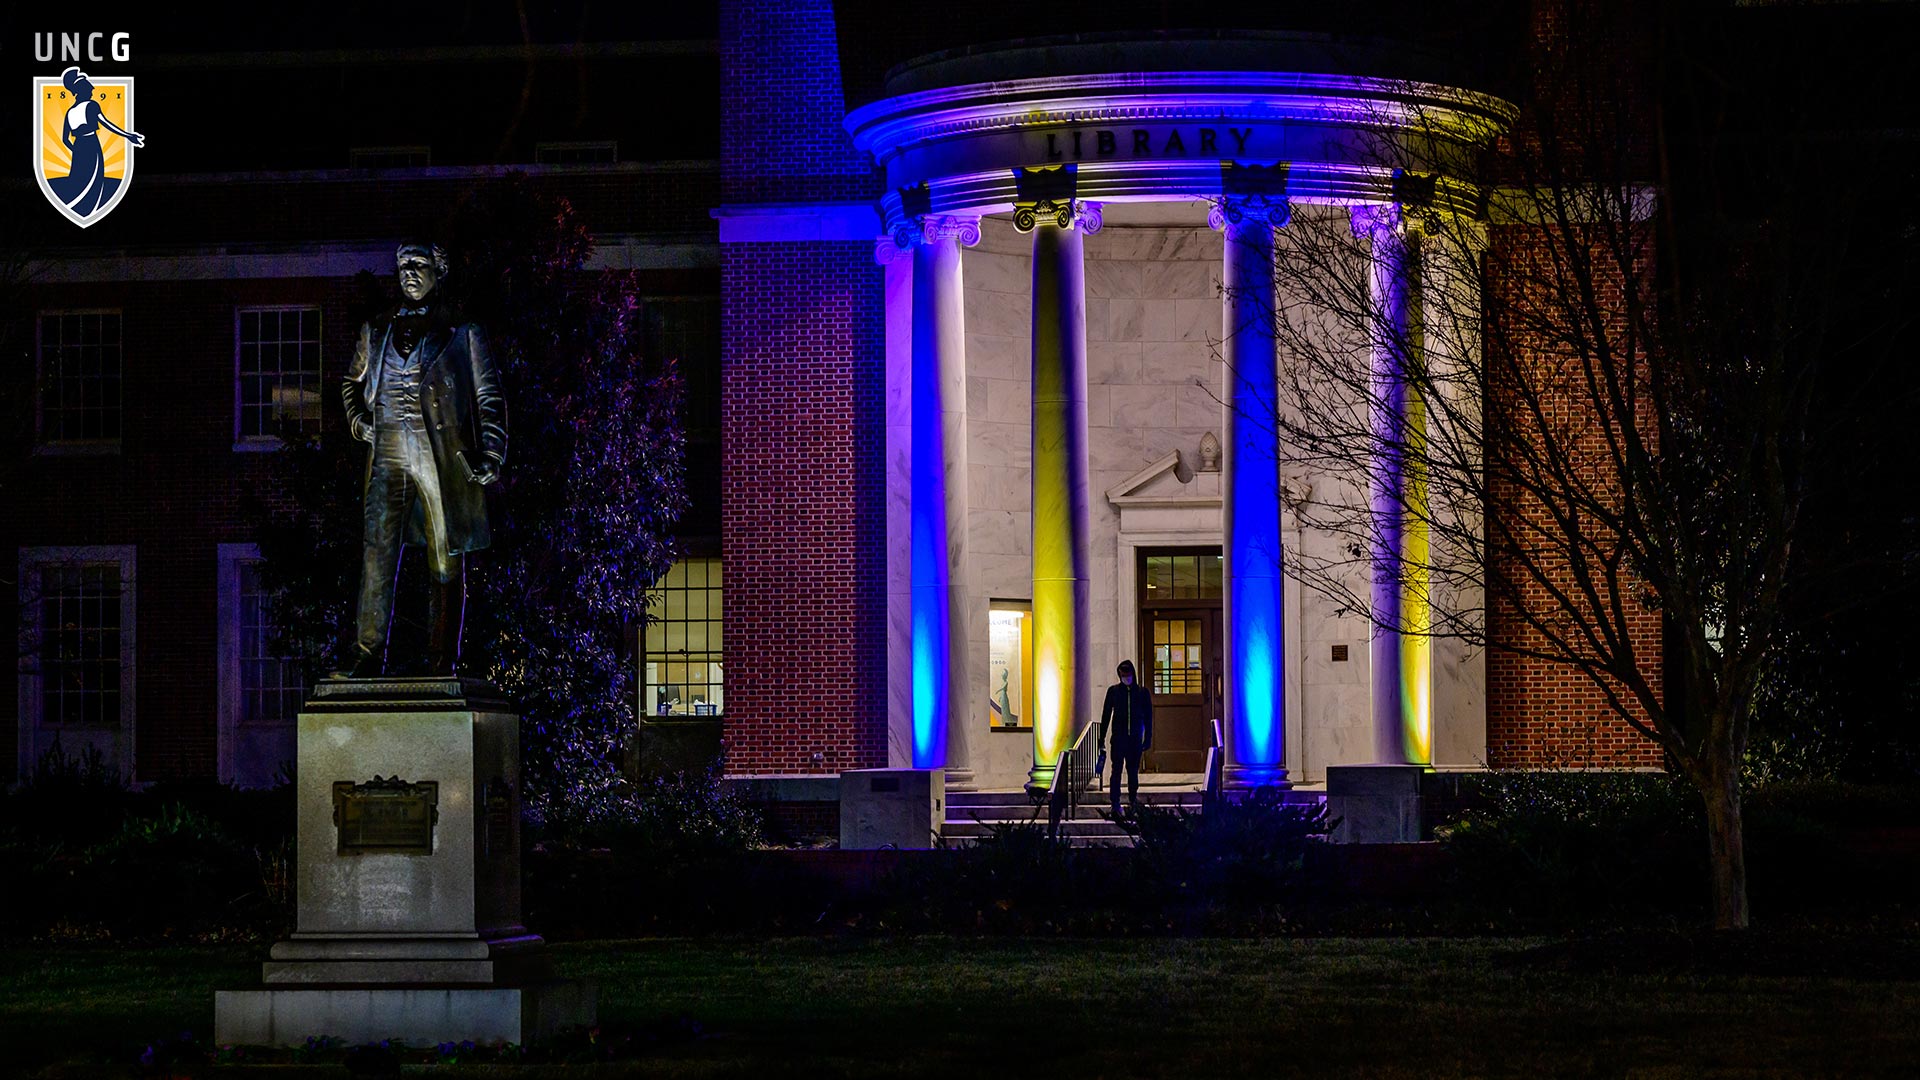 Jackson Library lit at night showing the McIver Statue in the foreground with the UNCG logo in top left corner